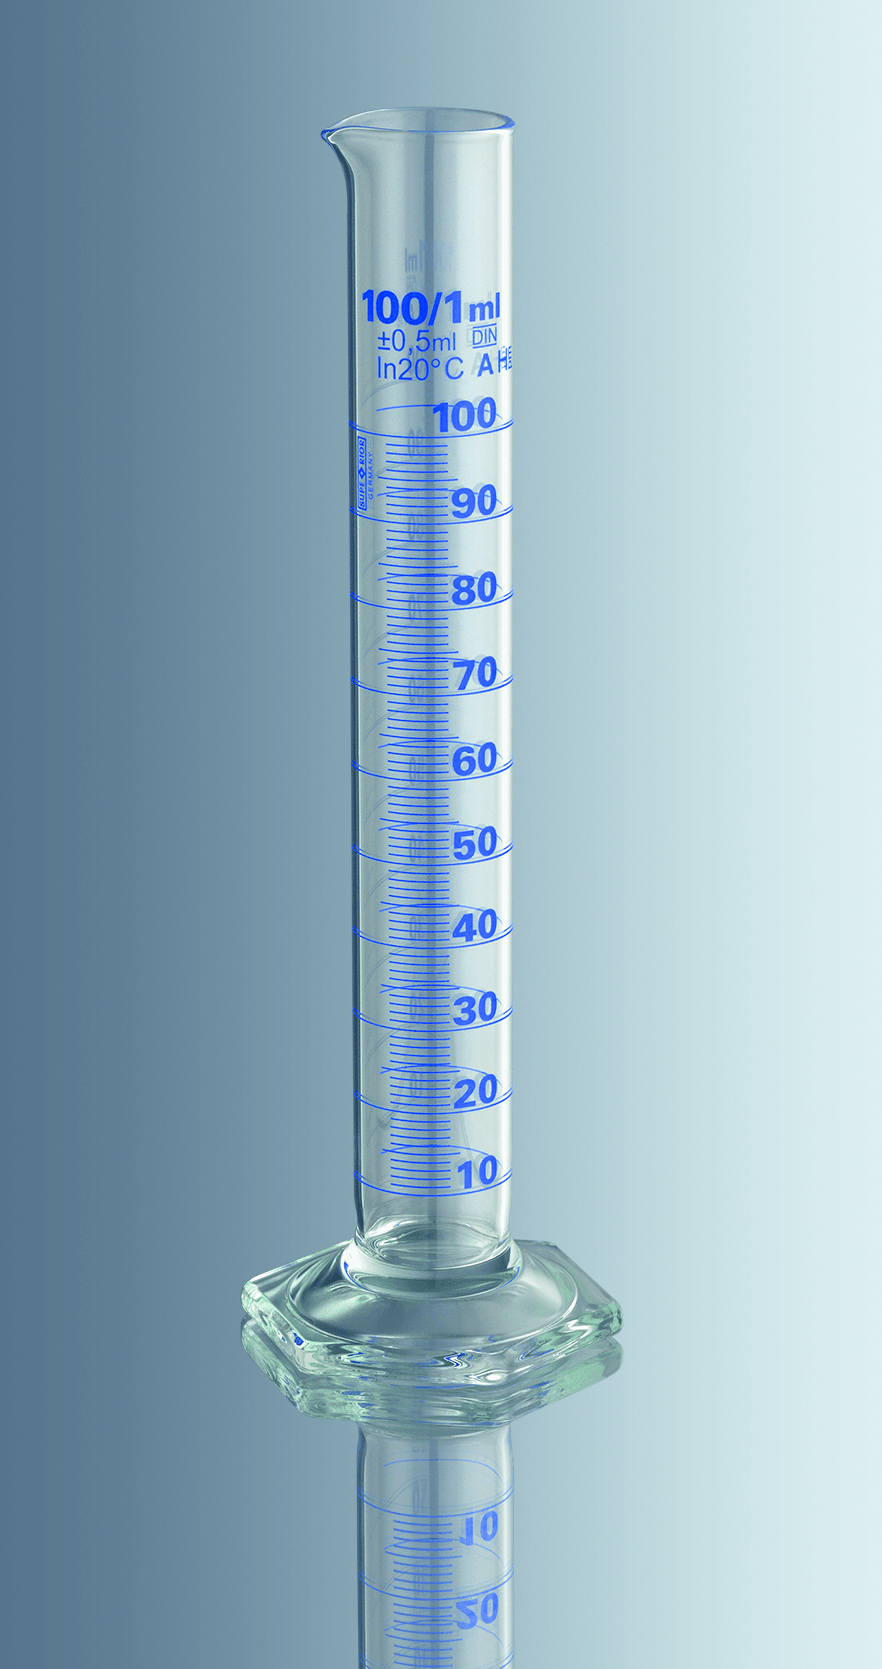 Marienfeld (Germany) Measuring Cylinder 100ml  Class A(Lot Certified) - Hex base, High quality Borosil.Glass